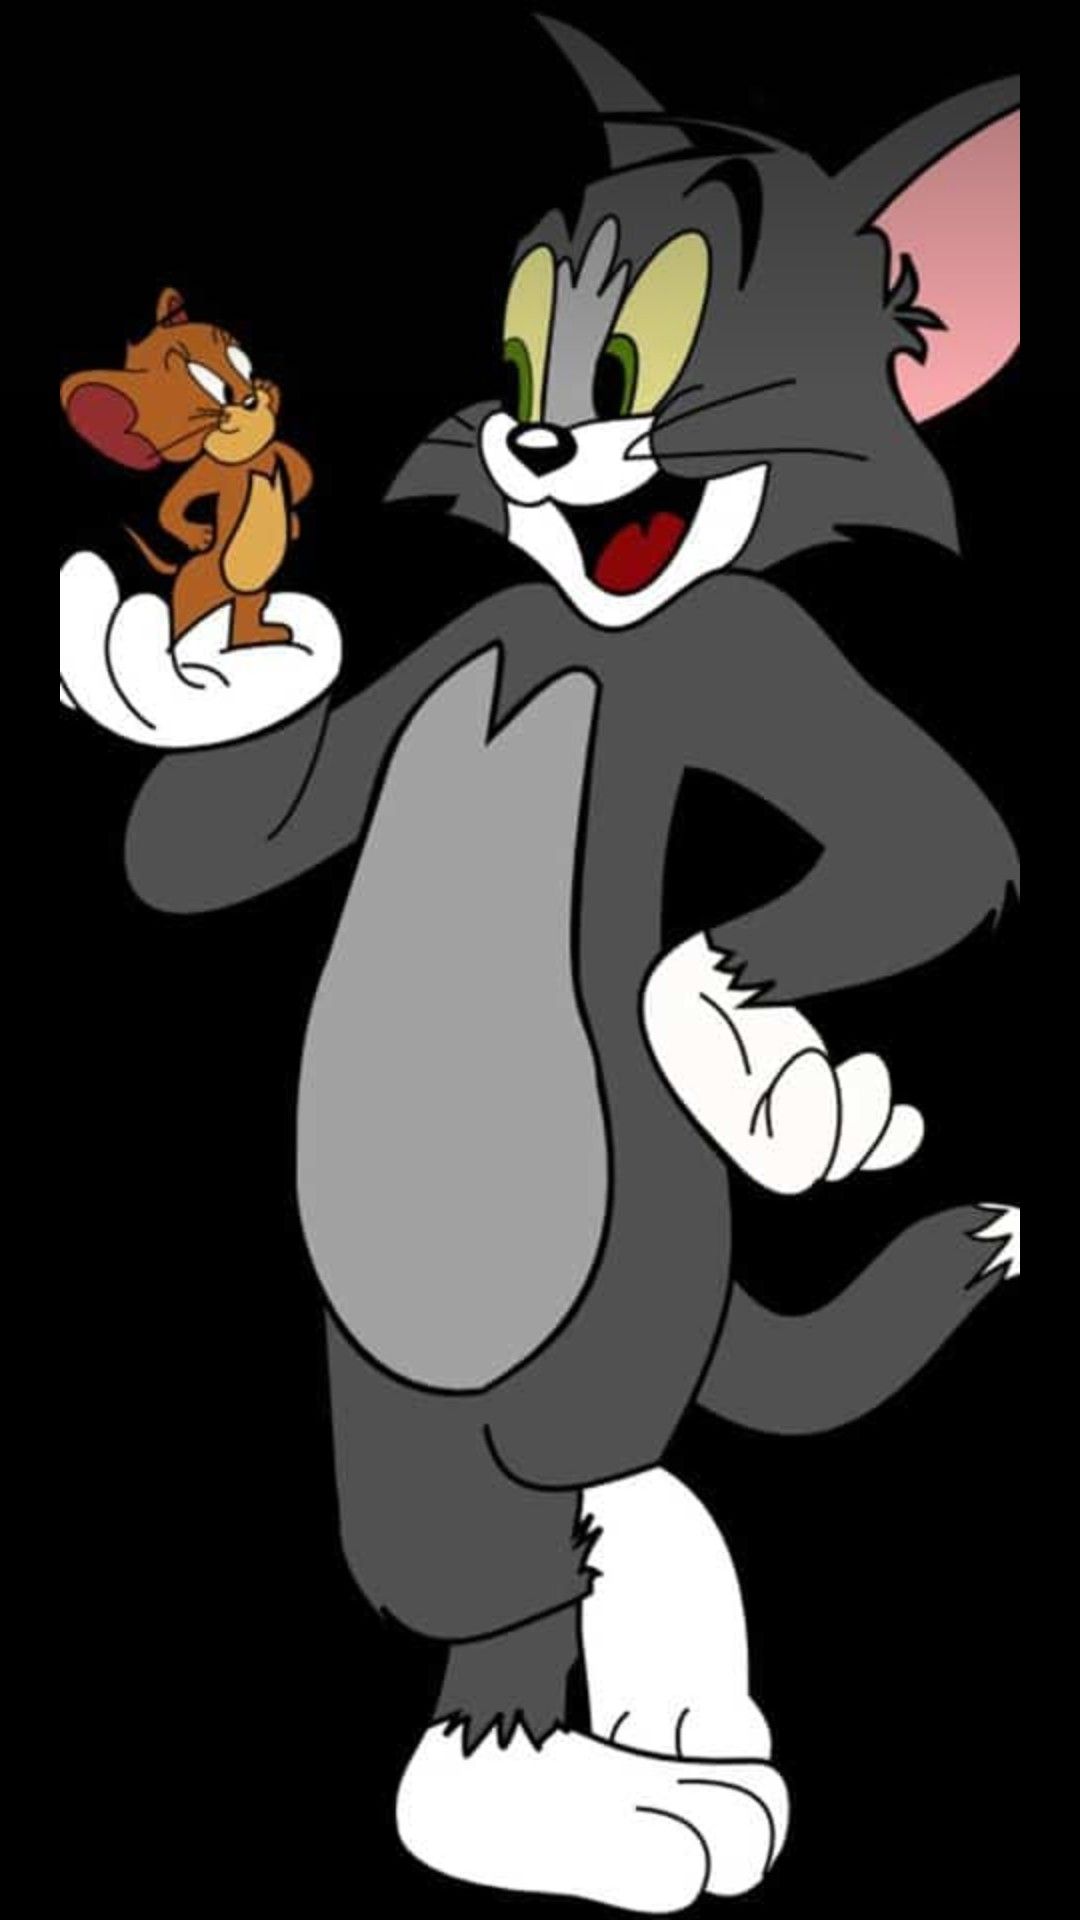 Cool Tom and Jerry Wallpapers on WallpaperDog